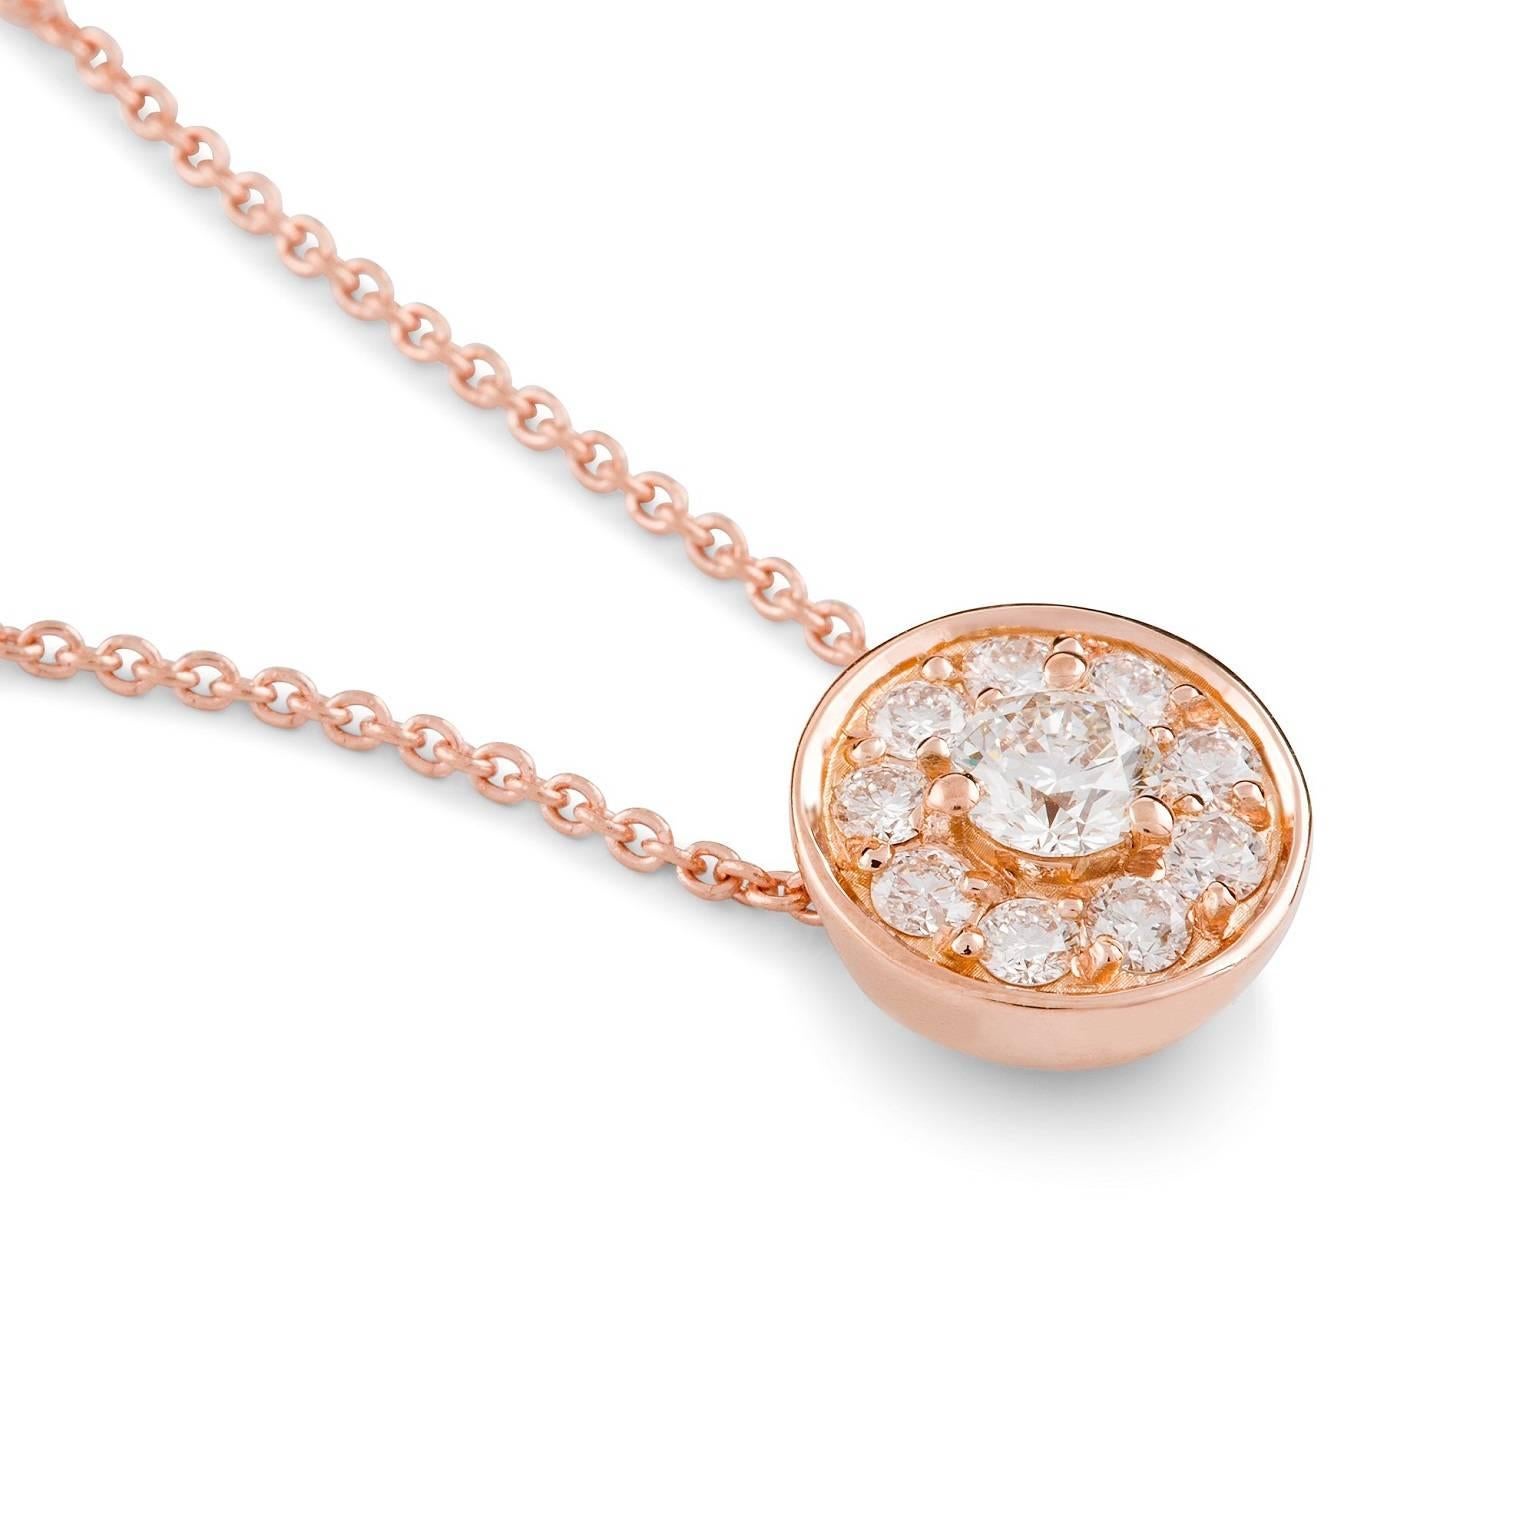 Rosa Halo Necklace

This gorgeous petite pendant features a stunning white round brilliant cut  diamond surrounded by a halo of white diamonds. The circular setting is suspended from an elegant 18 carat rose gold trace chain.

Round brilliant cut